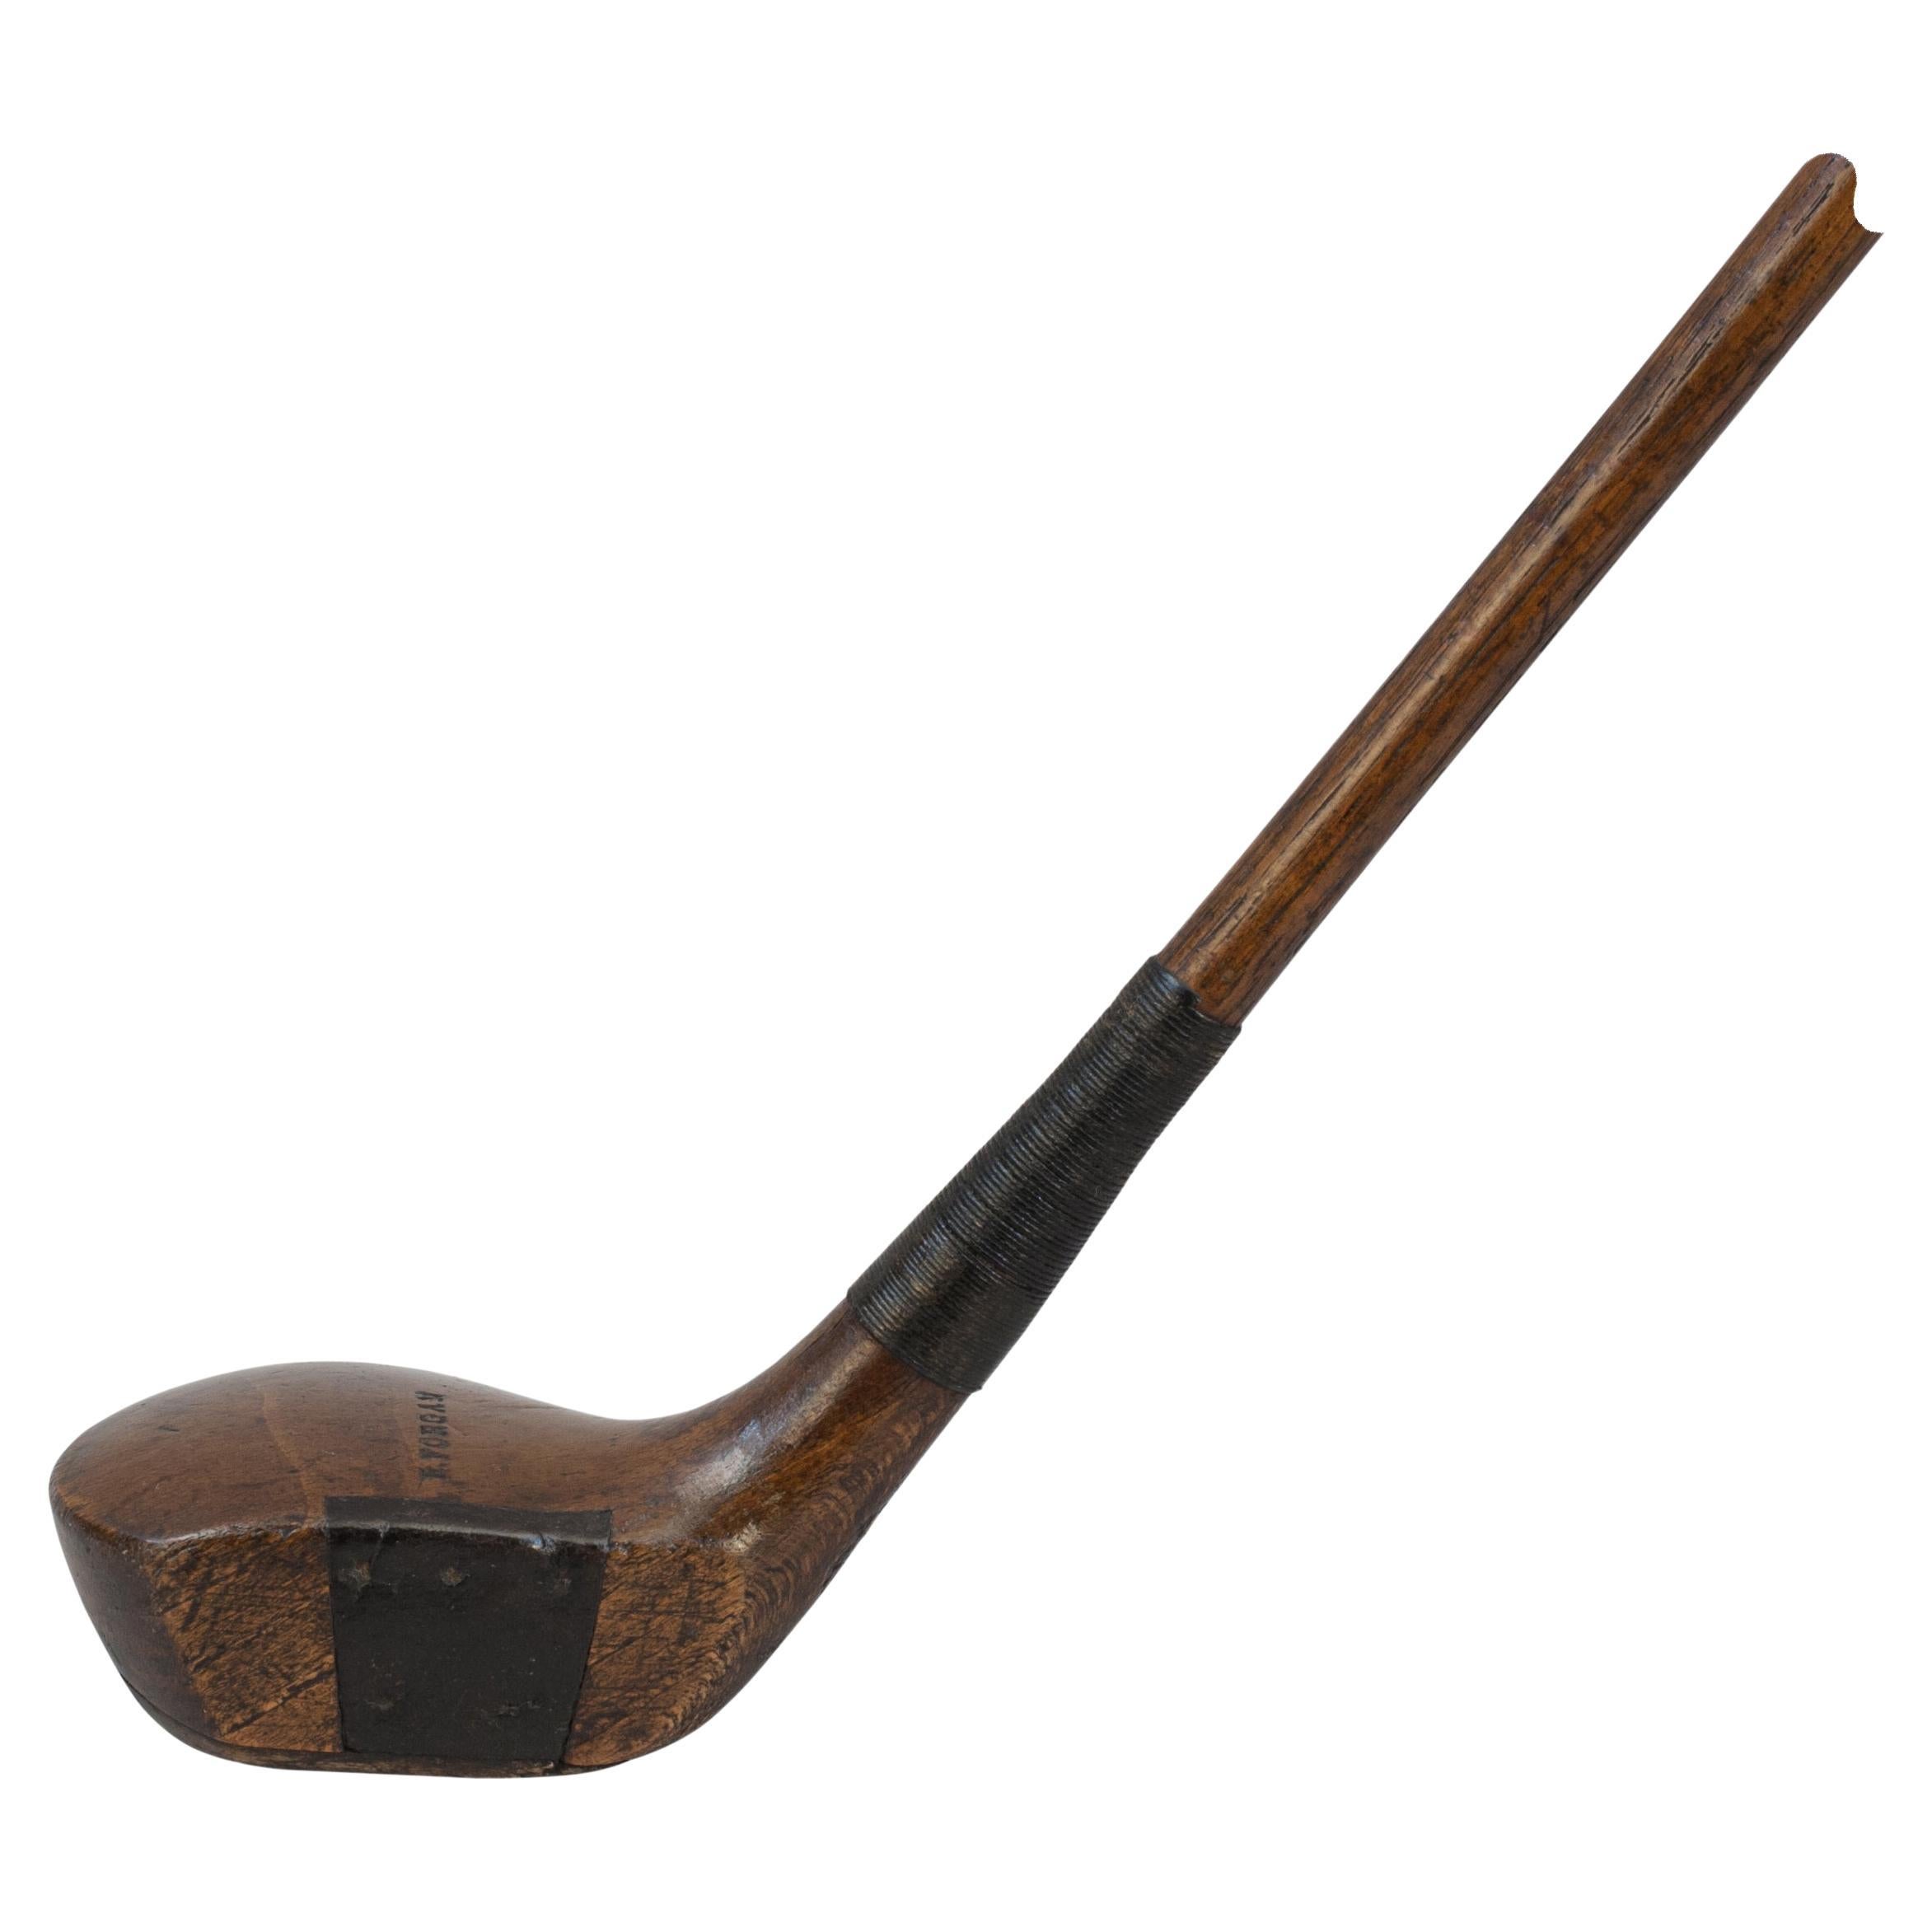 Persimmon Wood Small Head Golf Club, Driver by R. Forgan For Sale